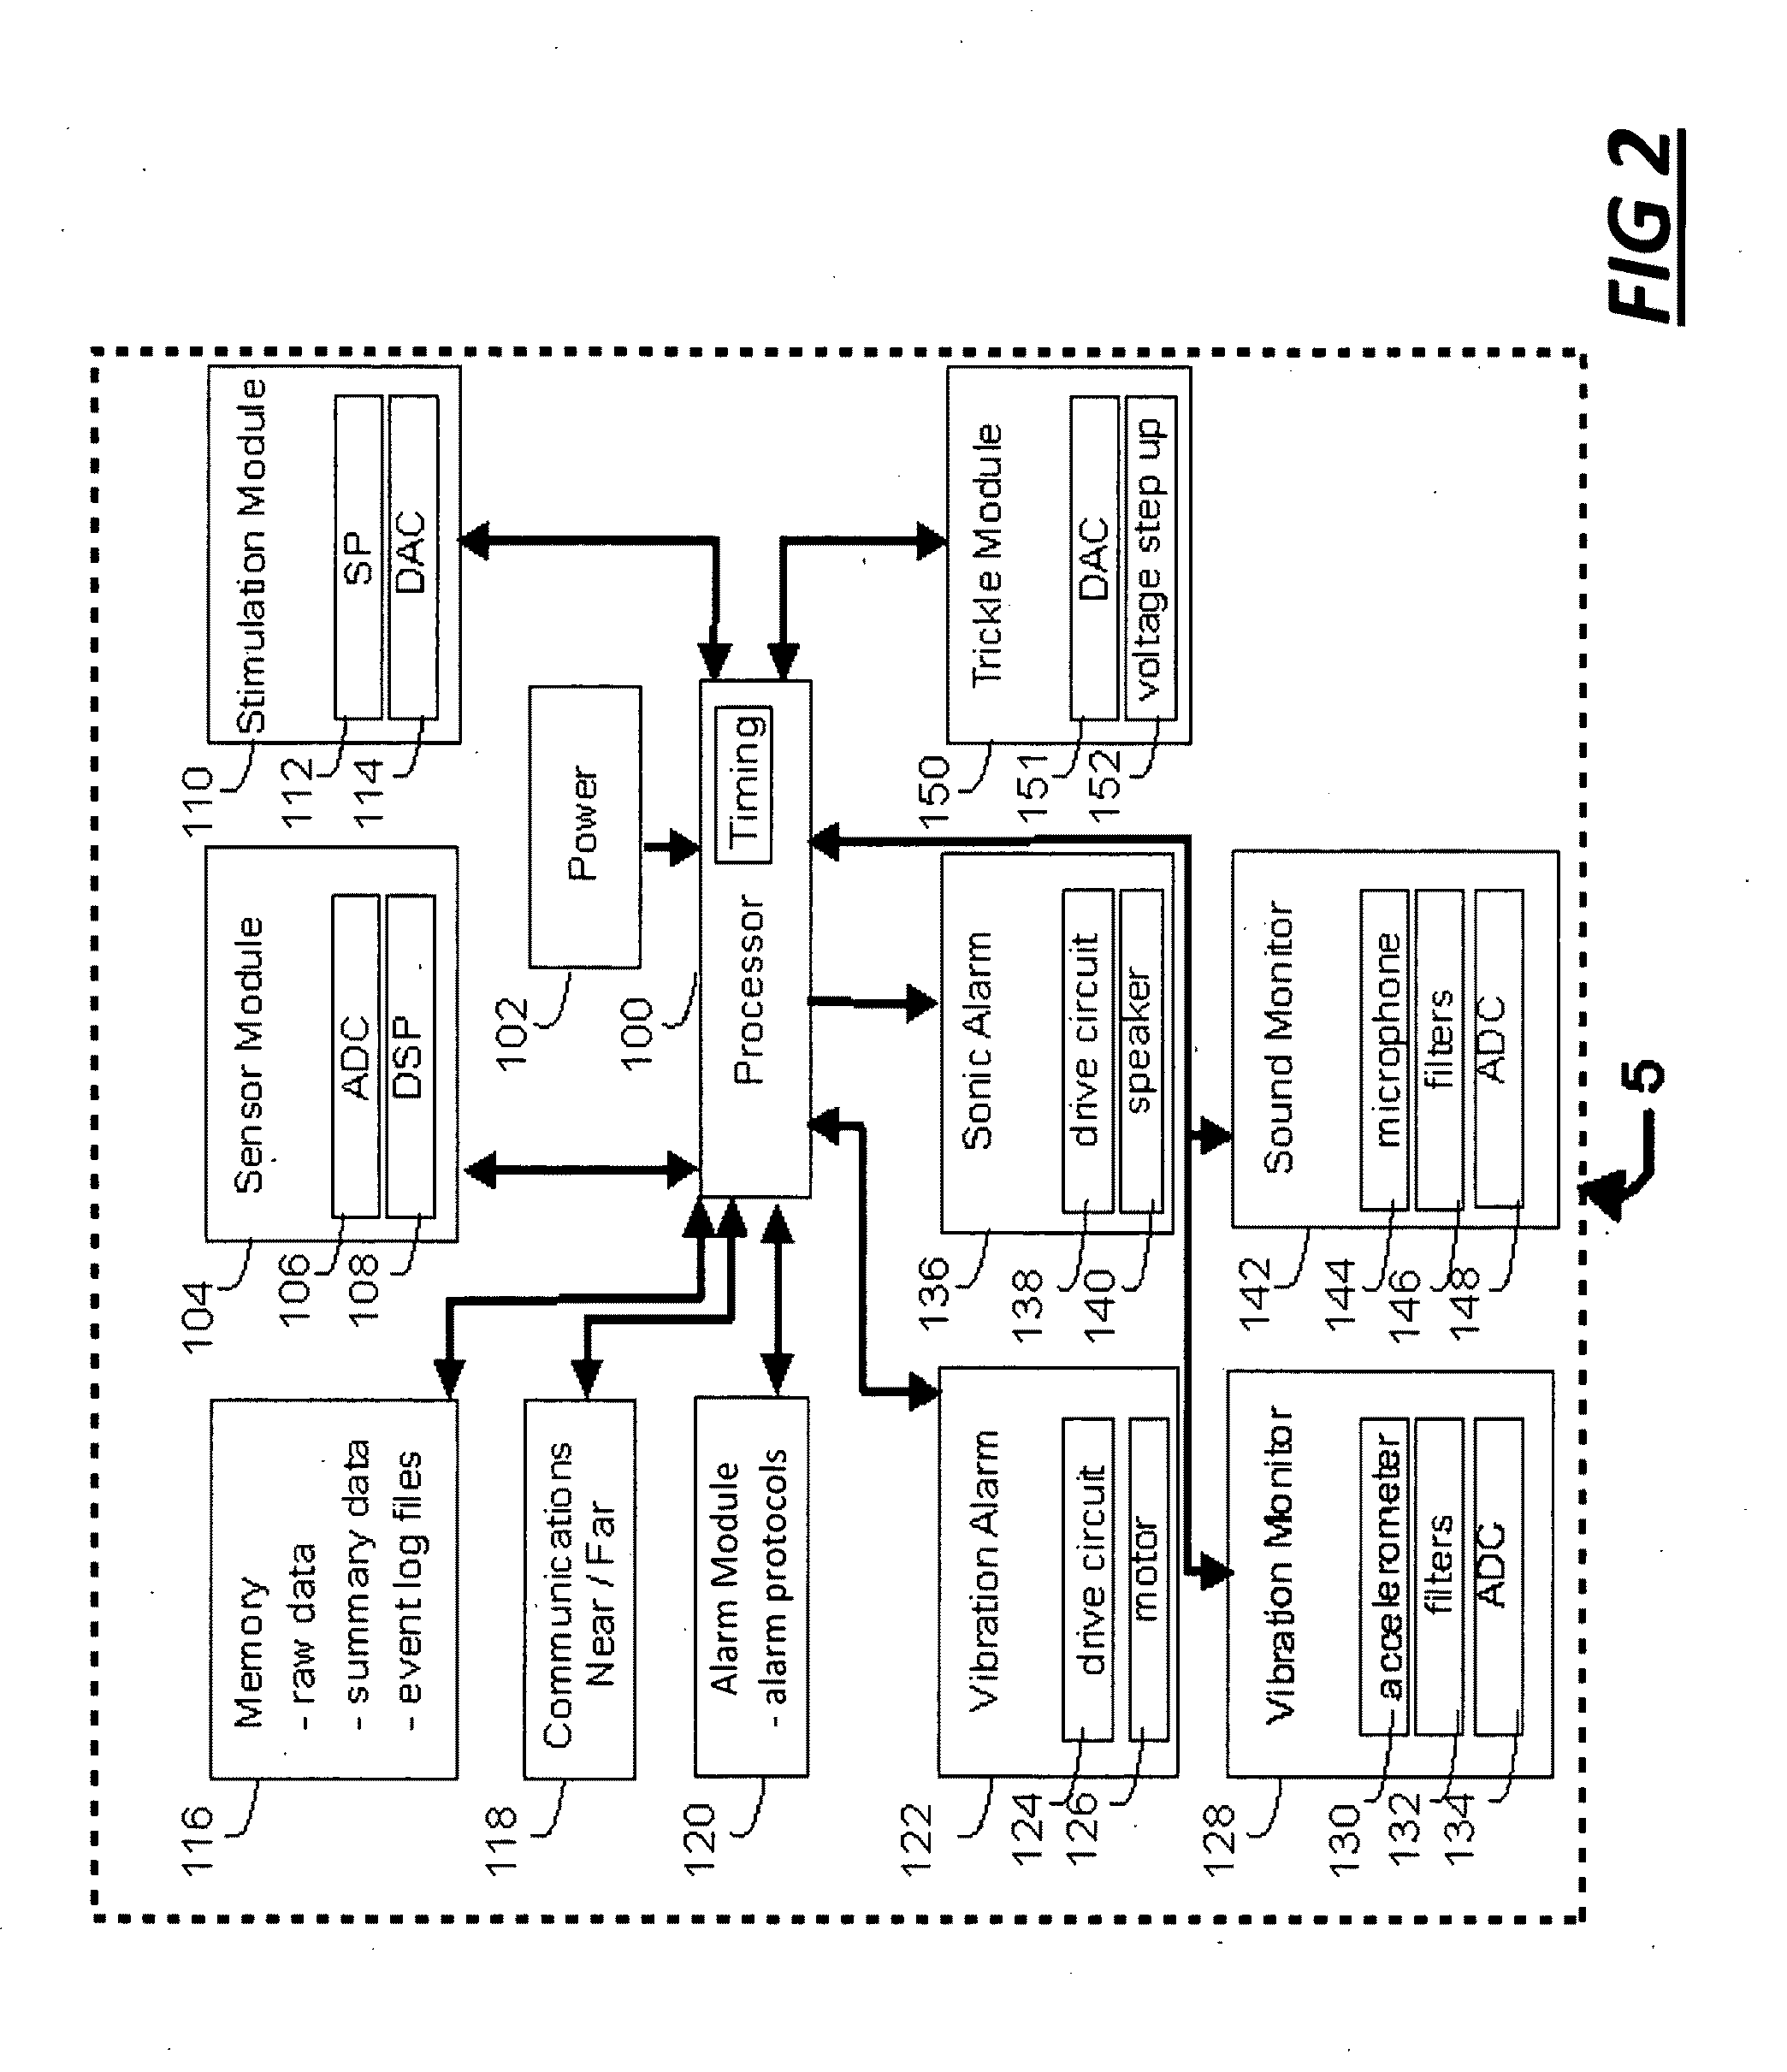 Systems and methods of alarm validation and backup in implanted medical devices